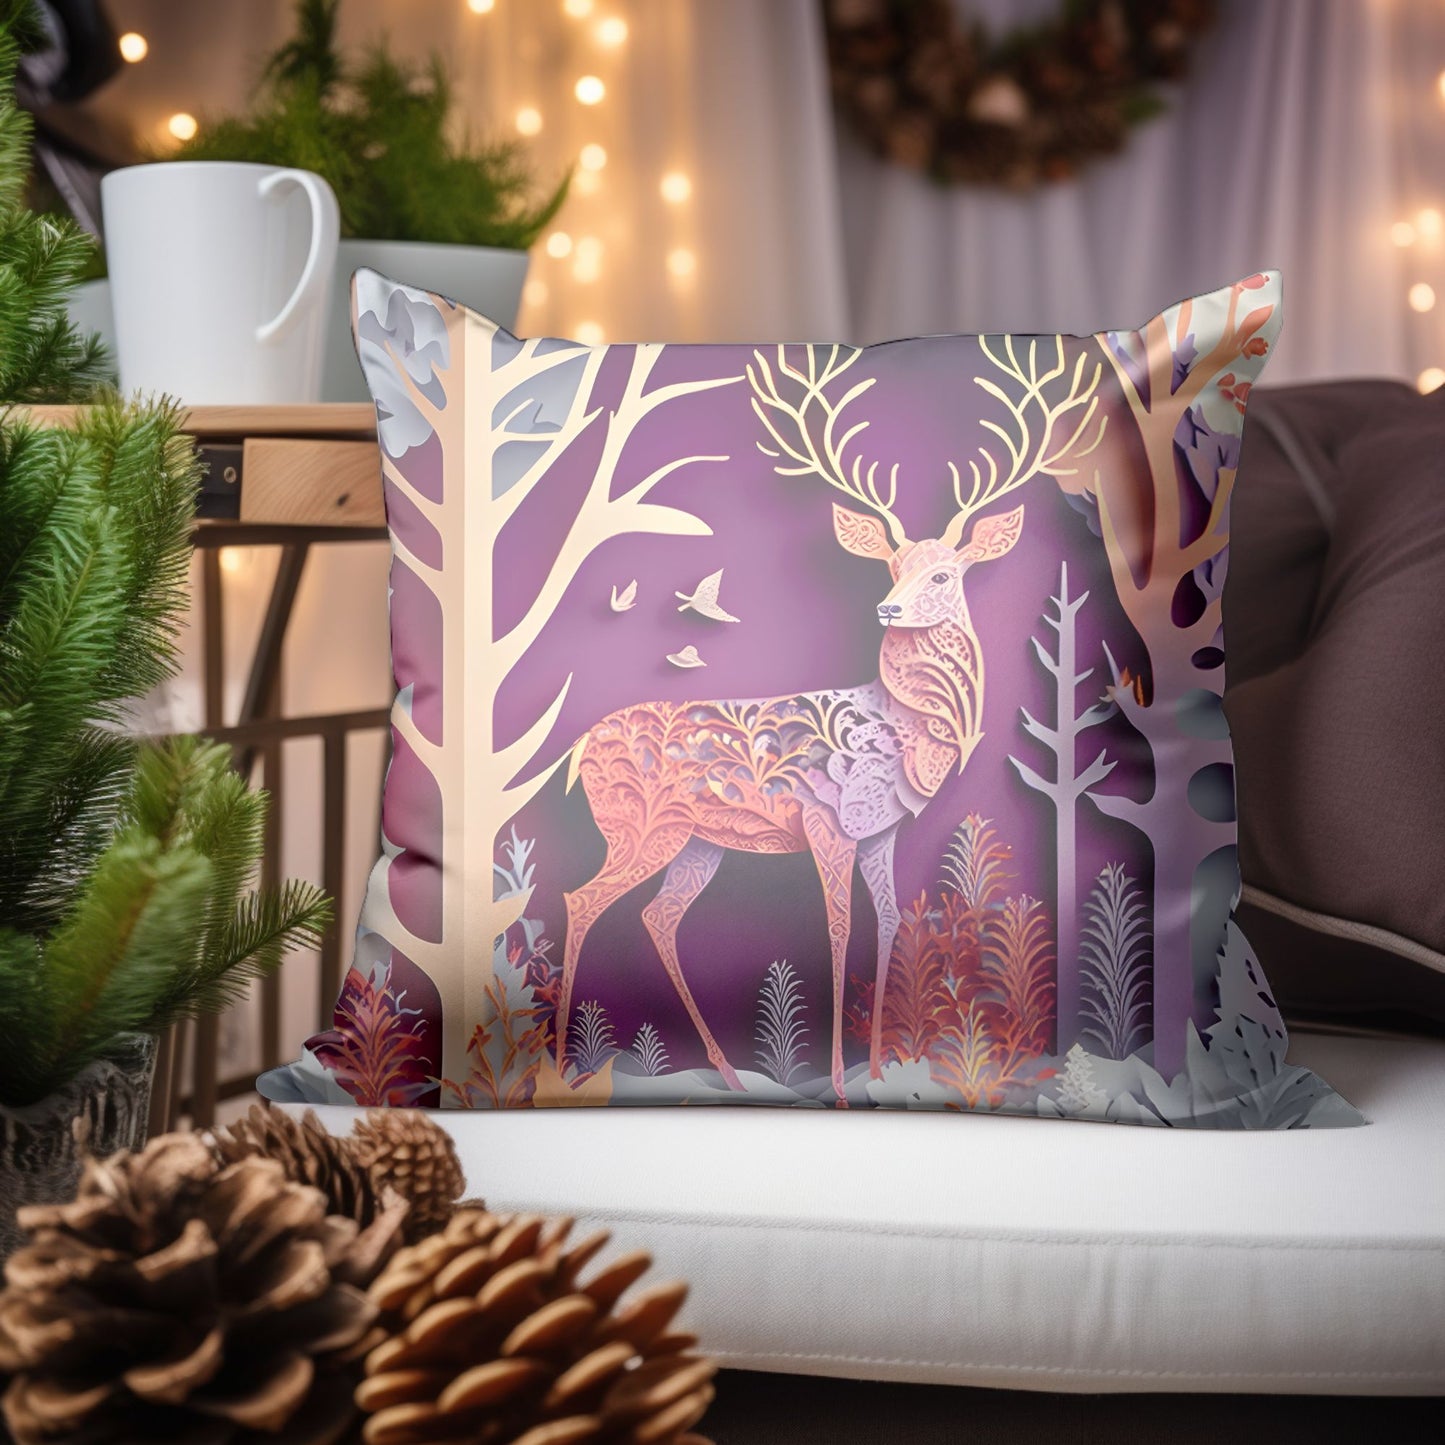 Reindeer Decor Pillow for a Playful Holiday Atmosphere